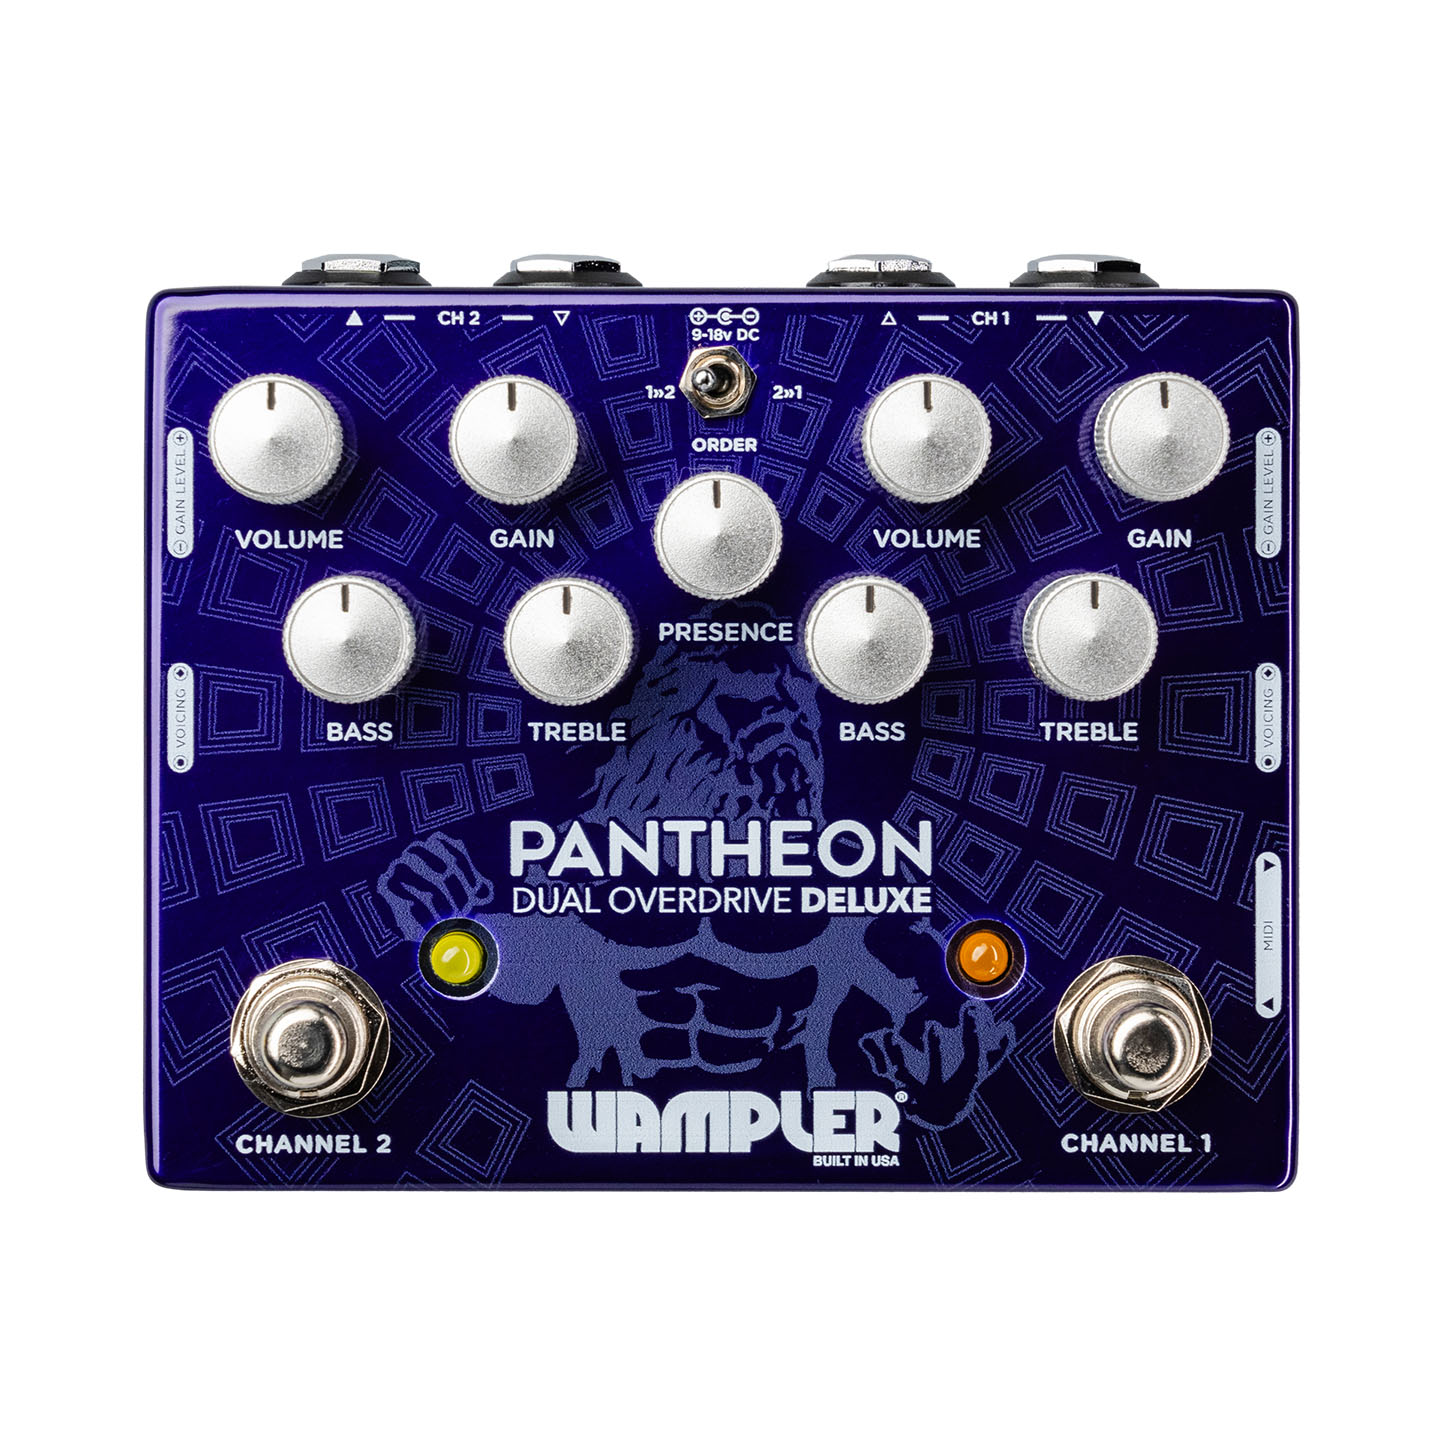 Pantheon Deluxe Pedal